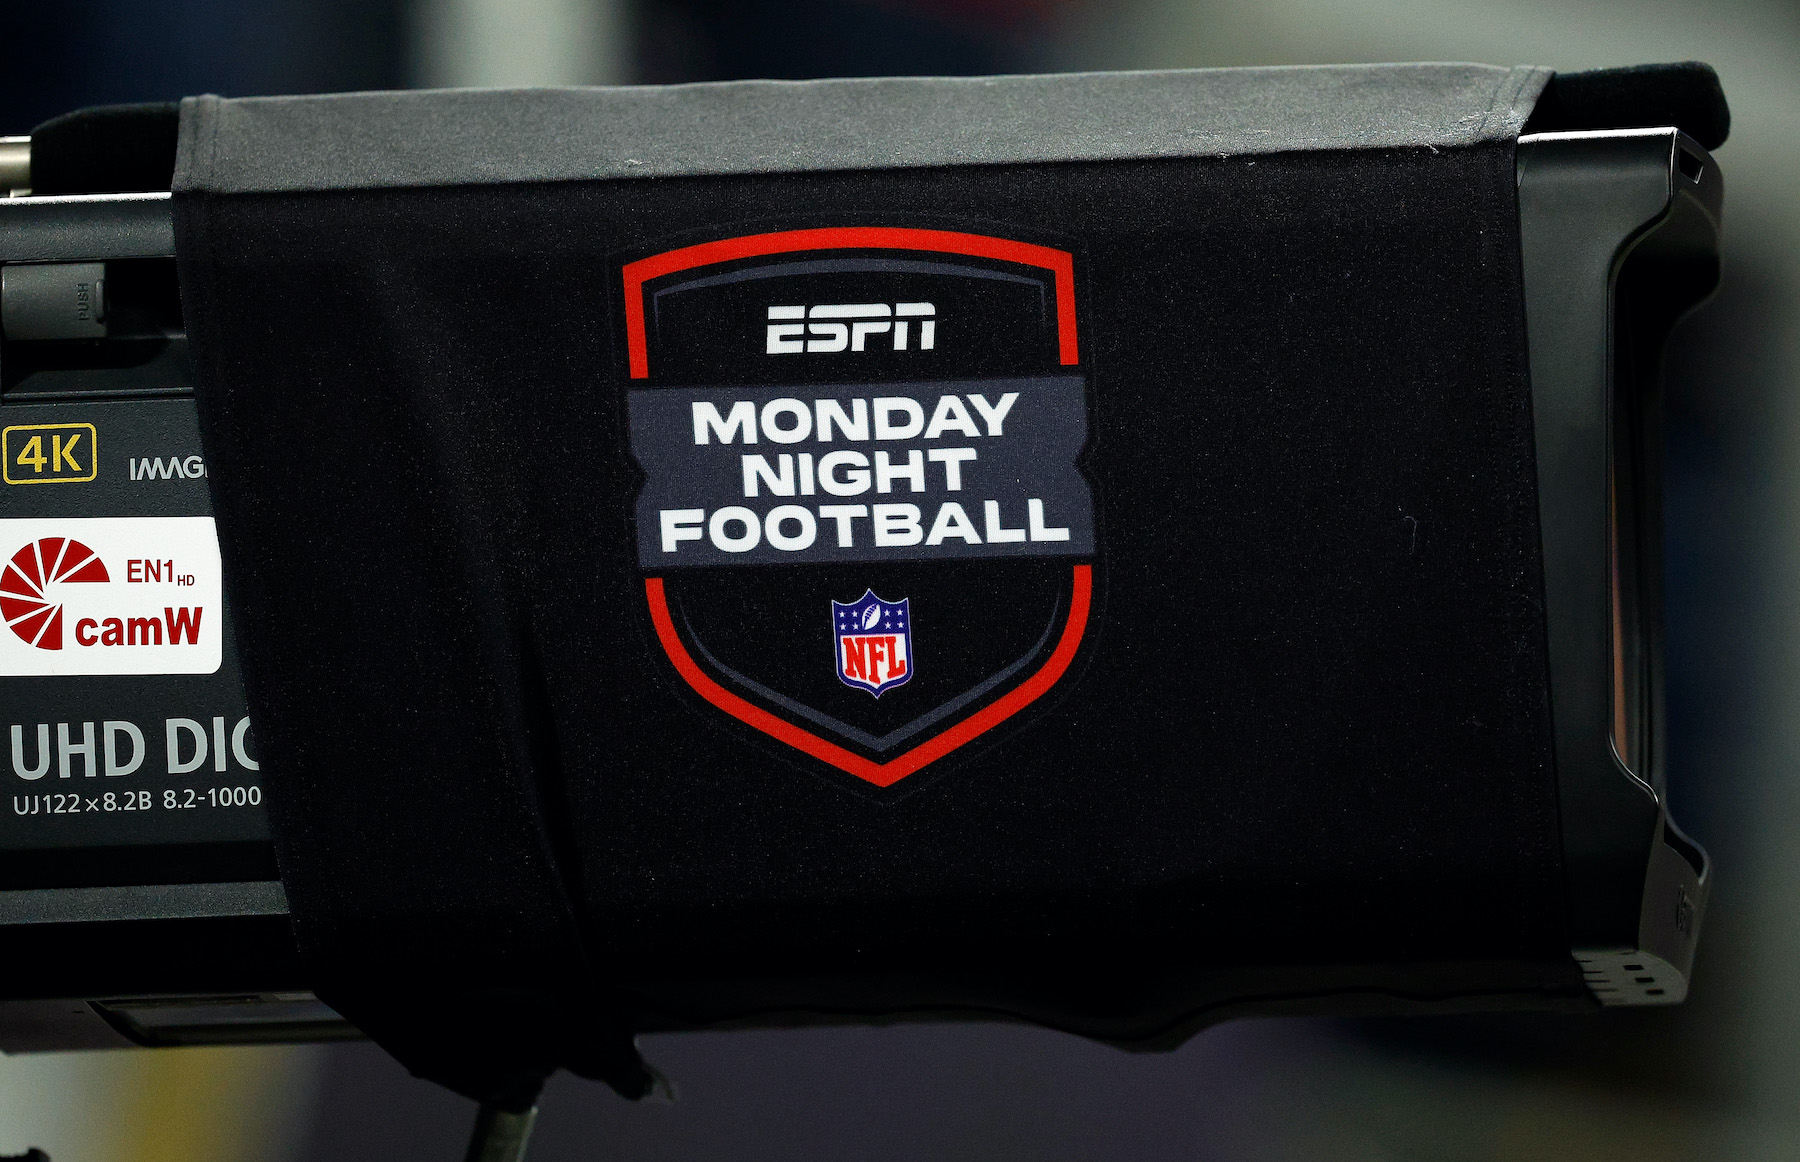 A view of an ESPN Monday Night Football logo on a TV camera.